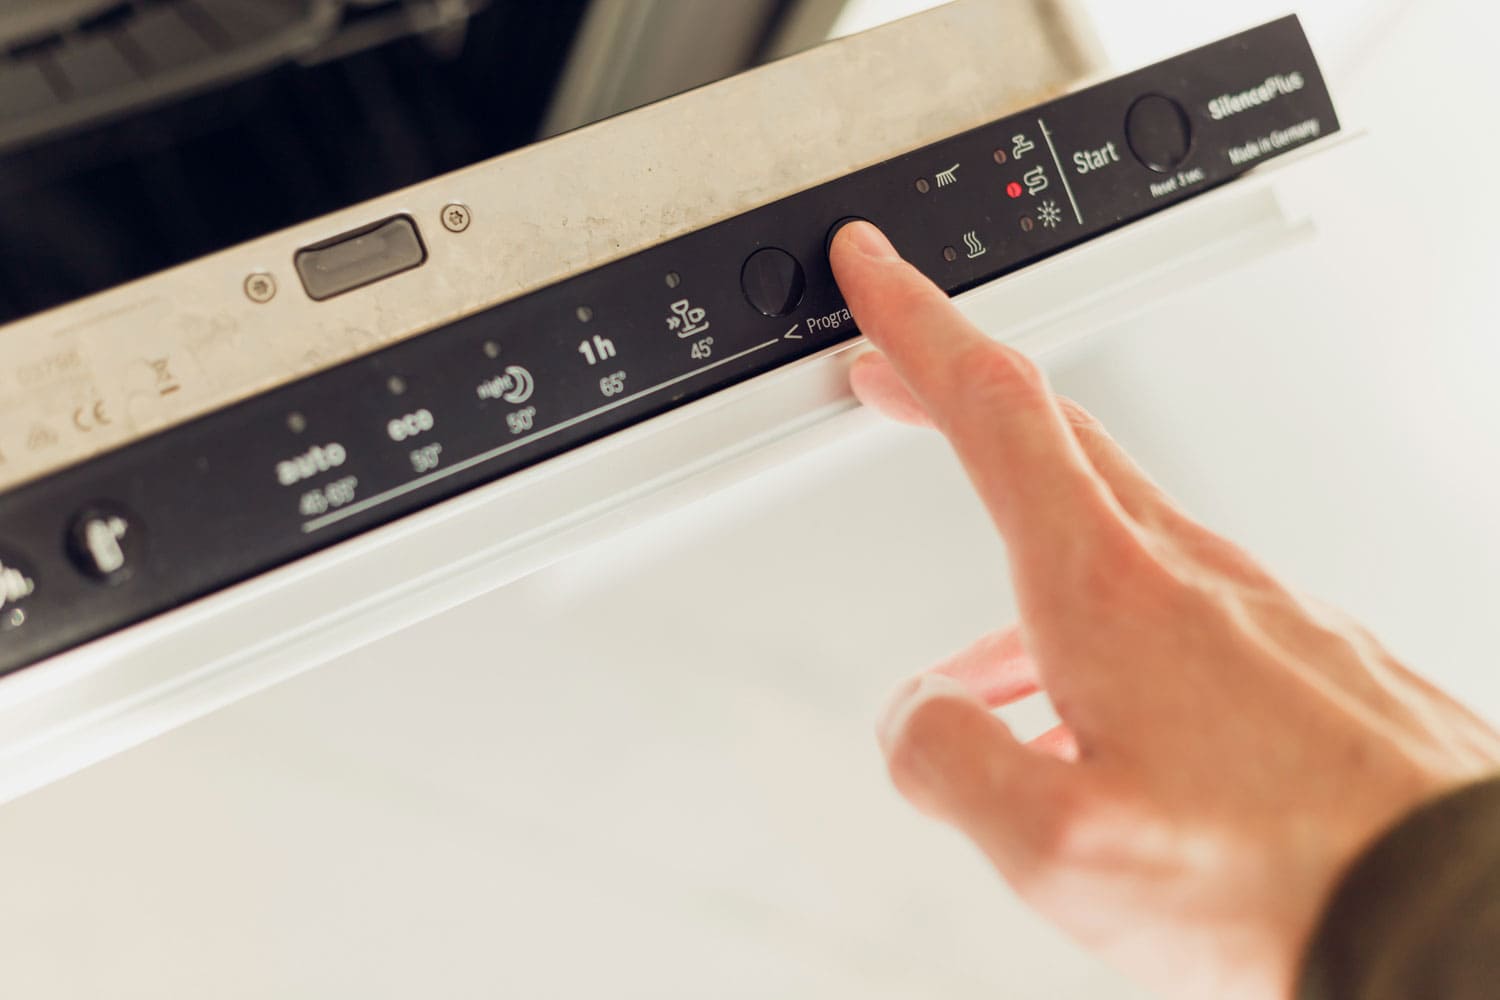 Adjusting the settings of the dishwasher